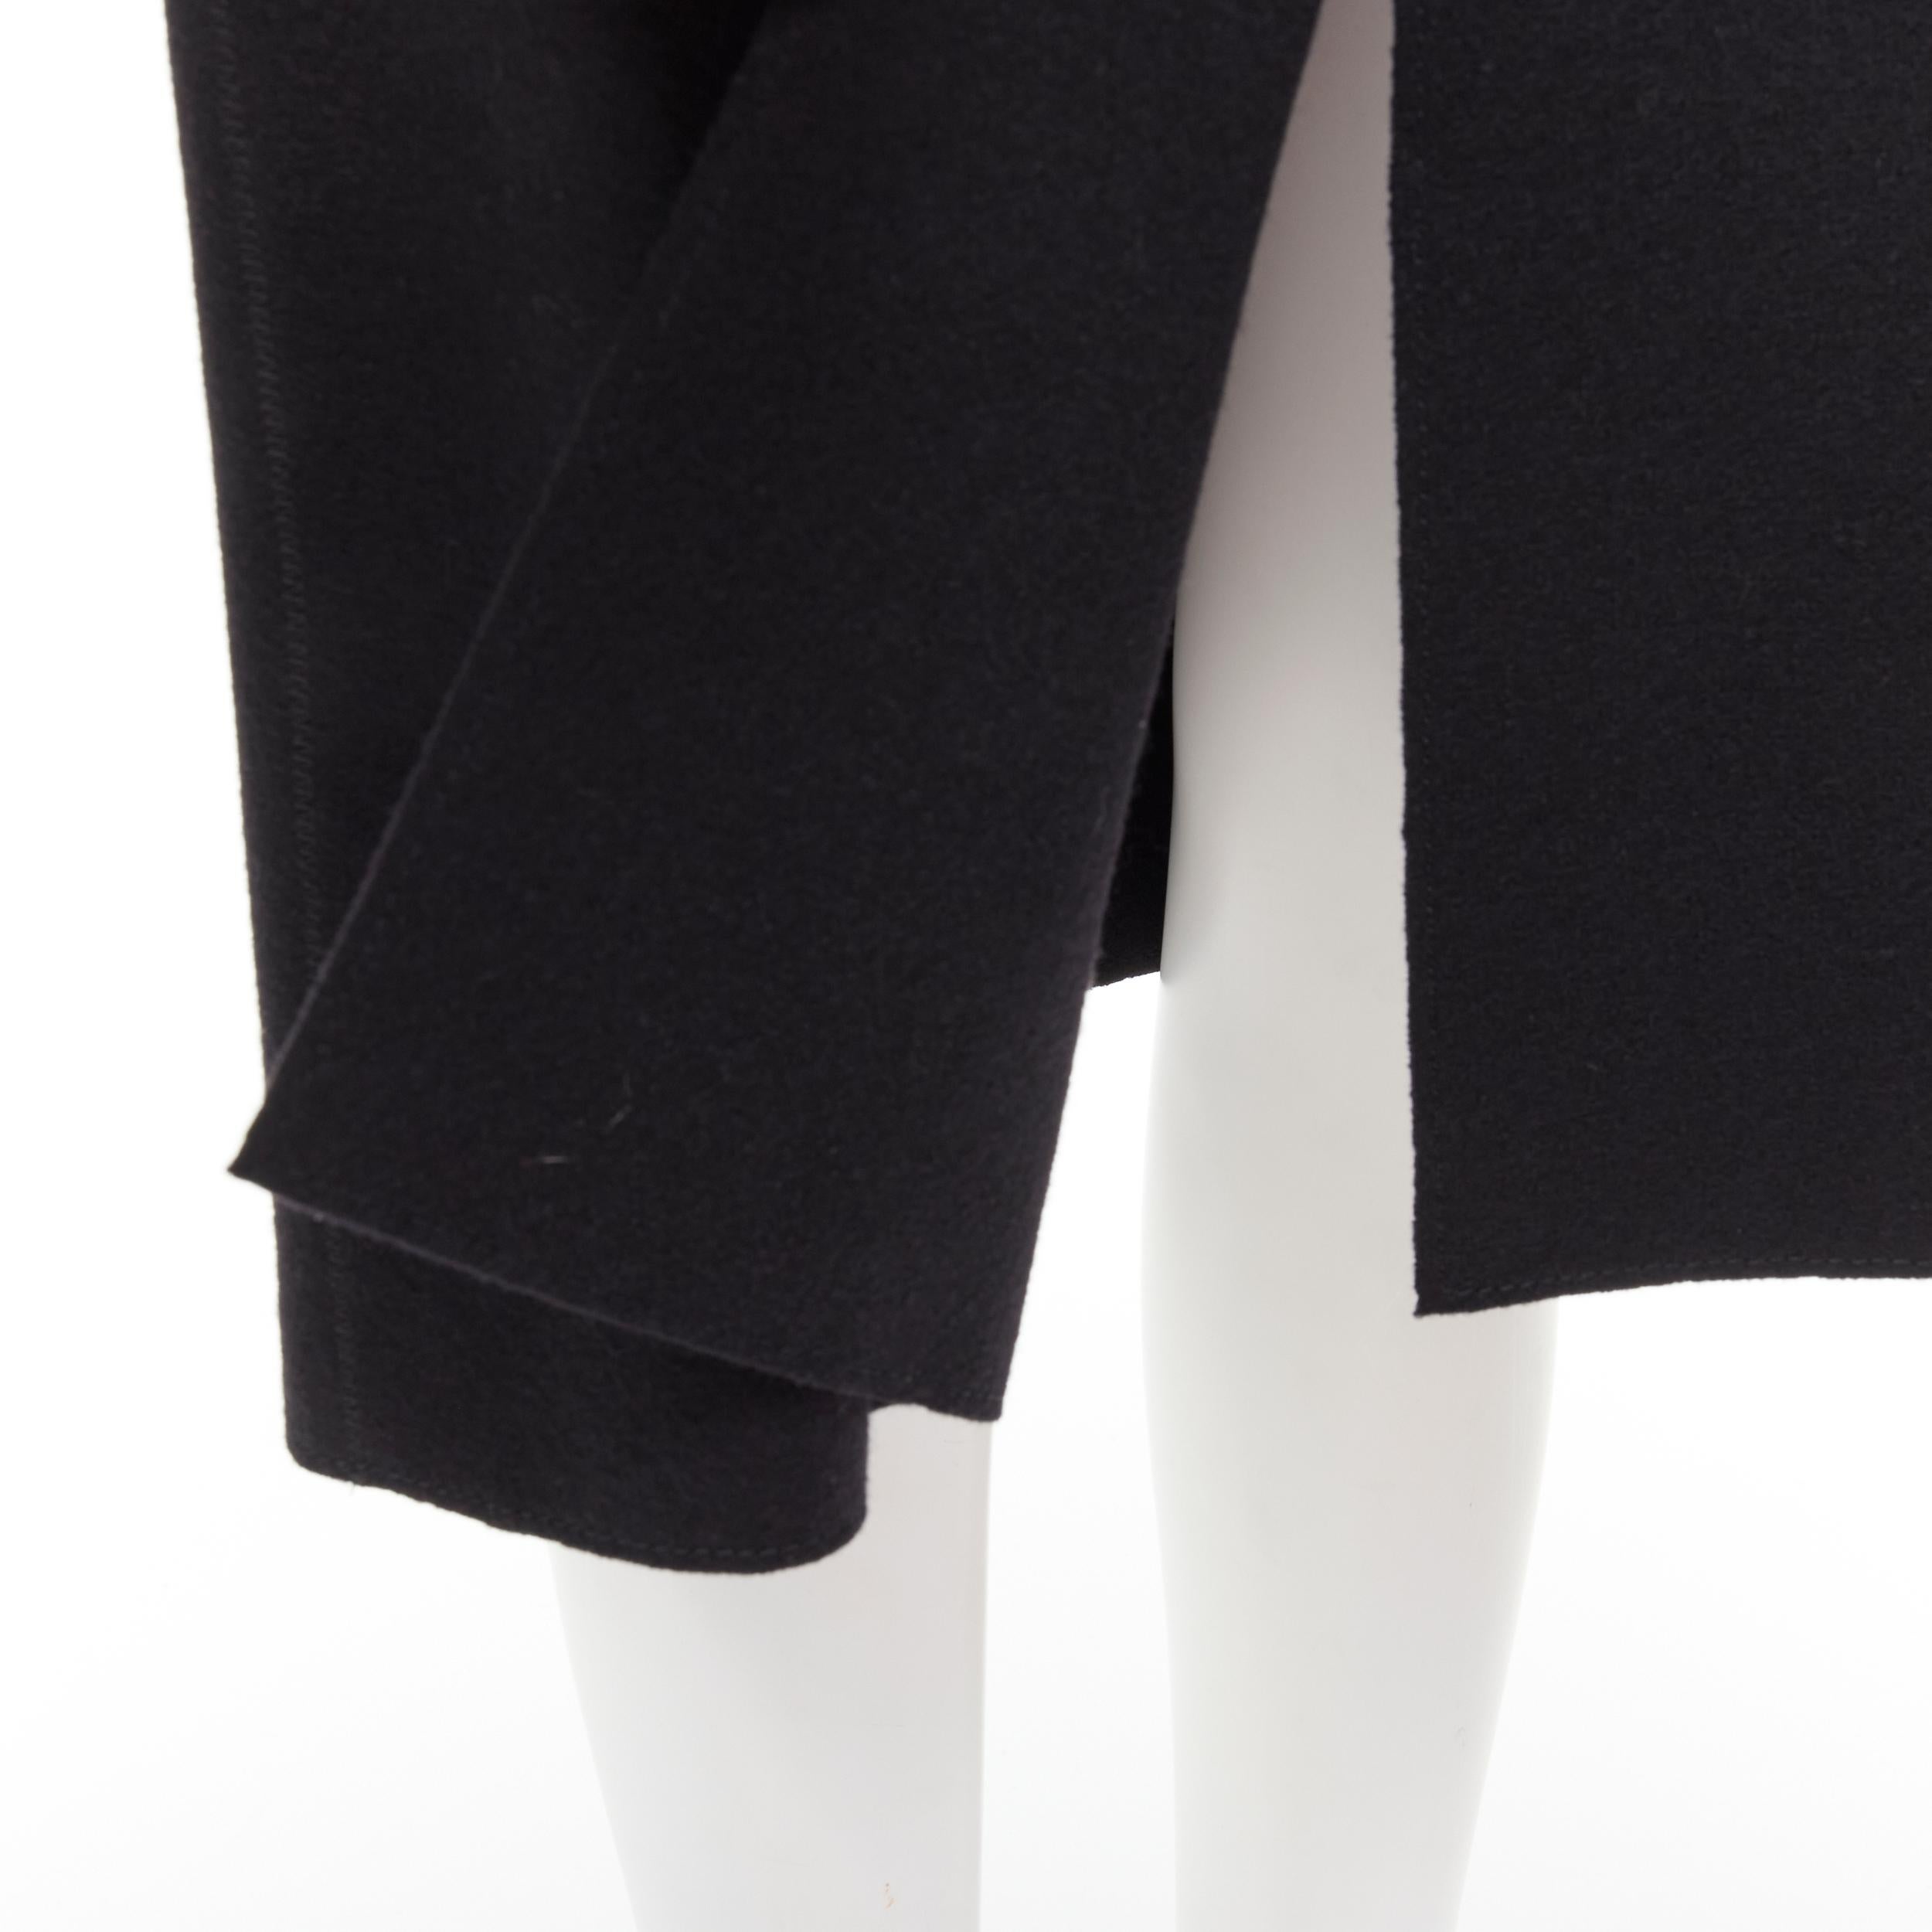 LANVIN Alber Elbaz 2004 black wool pinched darts button front fitted coat FR38 S For Sale 3